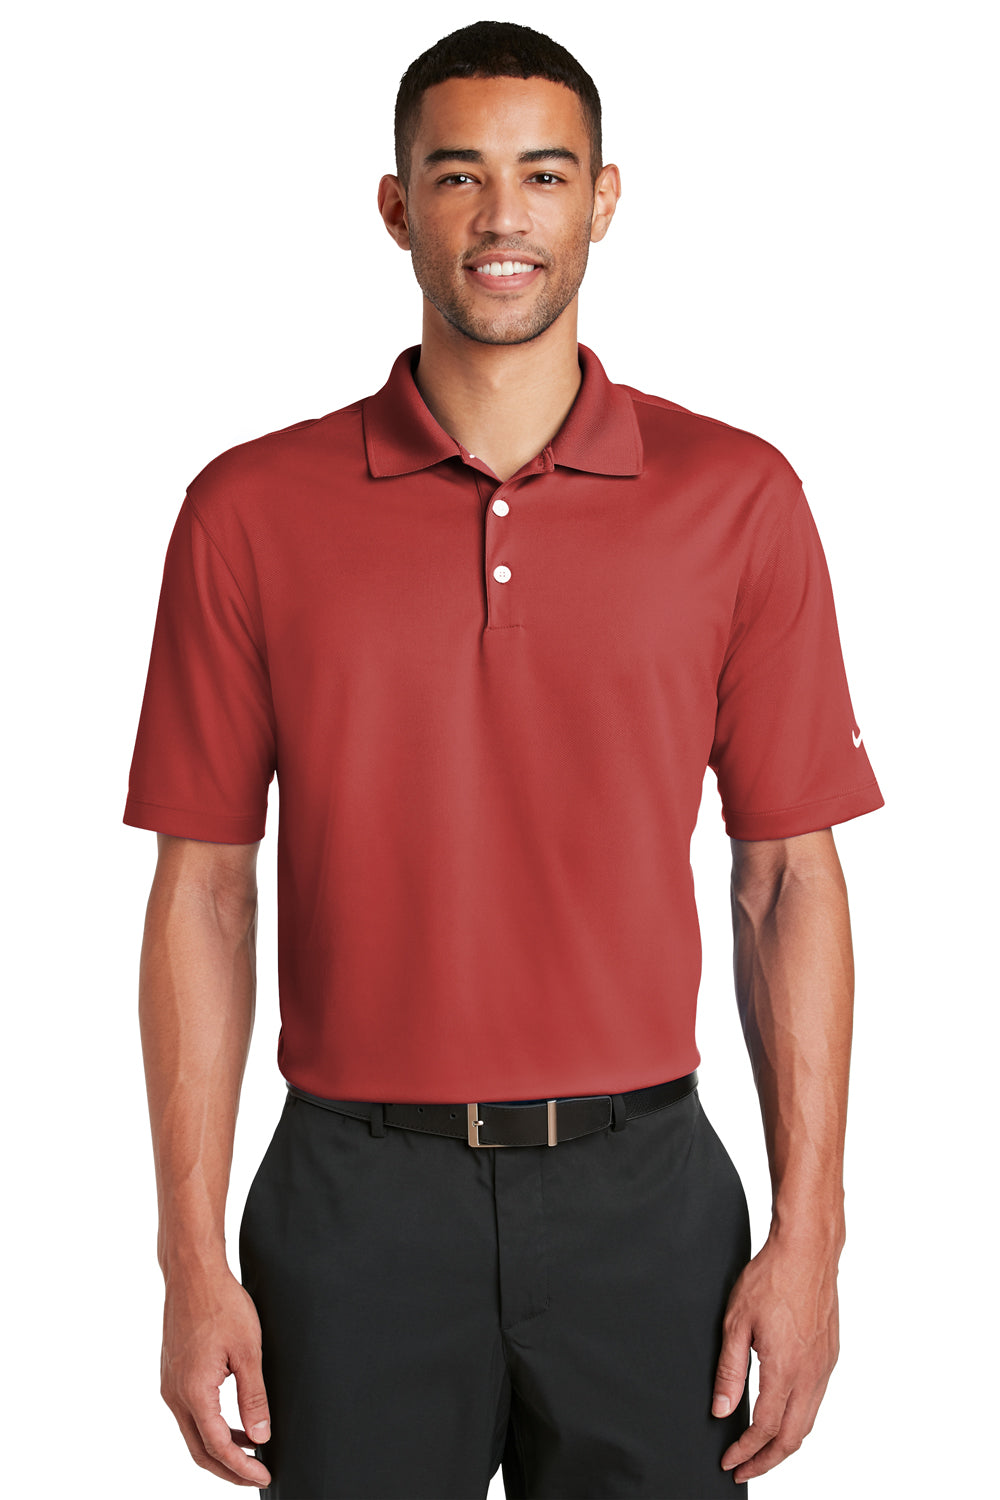 Nike Mens Dri-Fit Moisture Wicking Short Sleeve Polo Shirt - Varsity Red (DISCONTINUED)